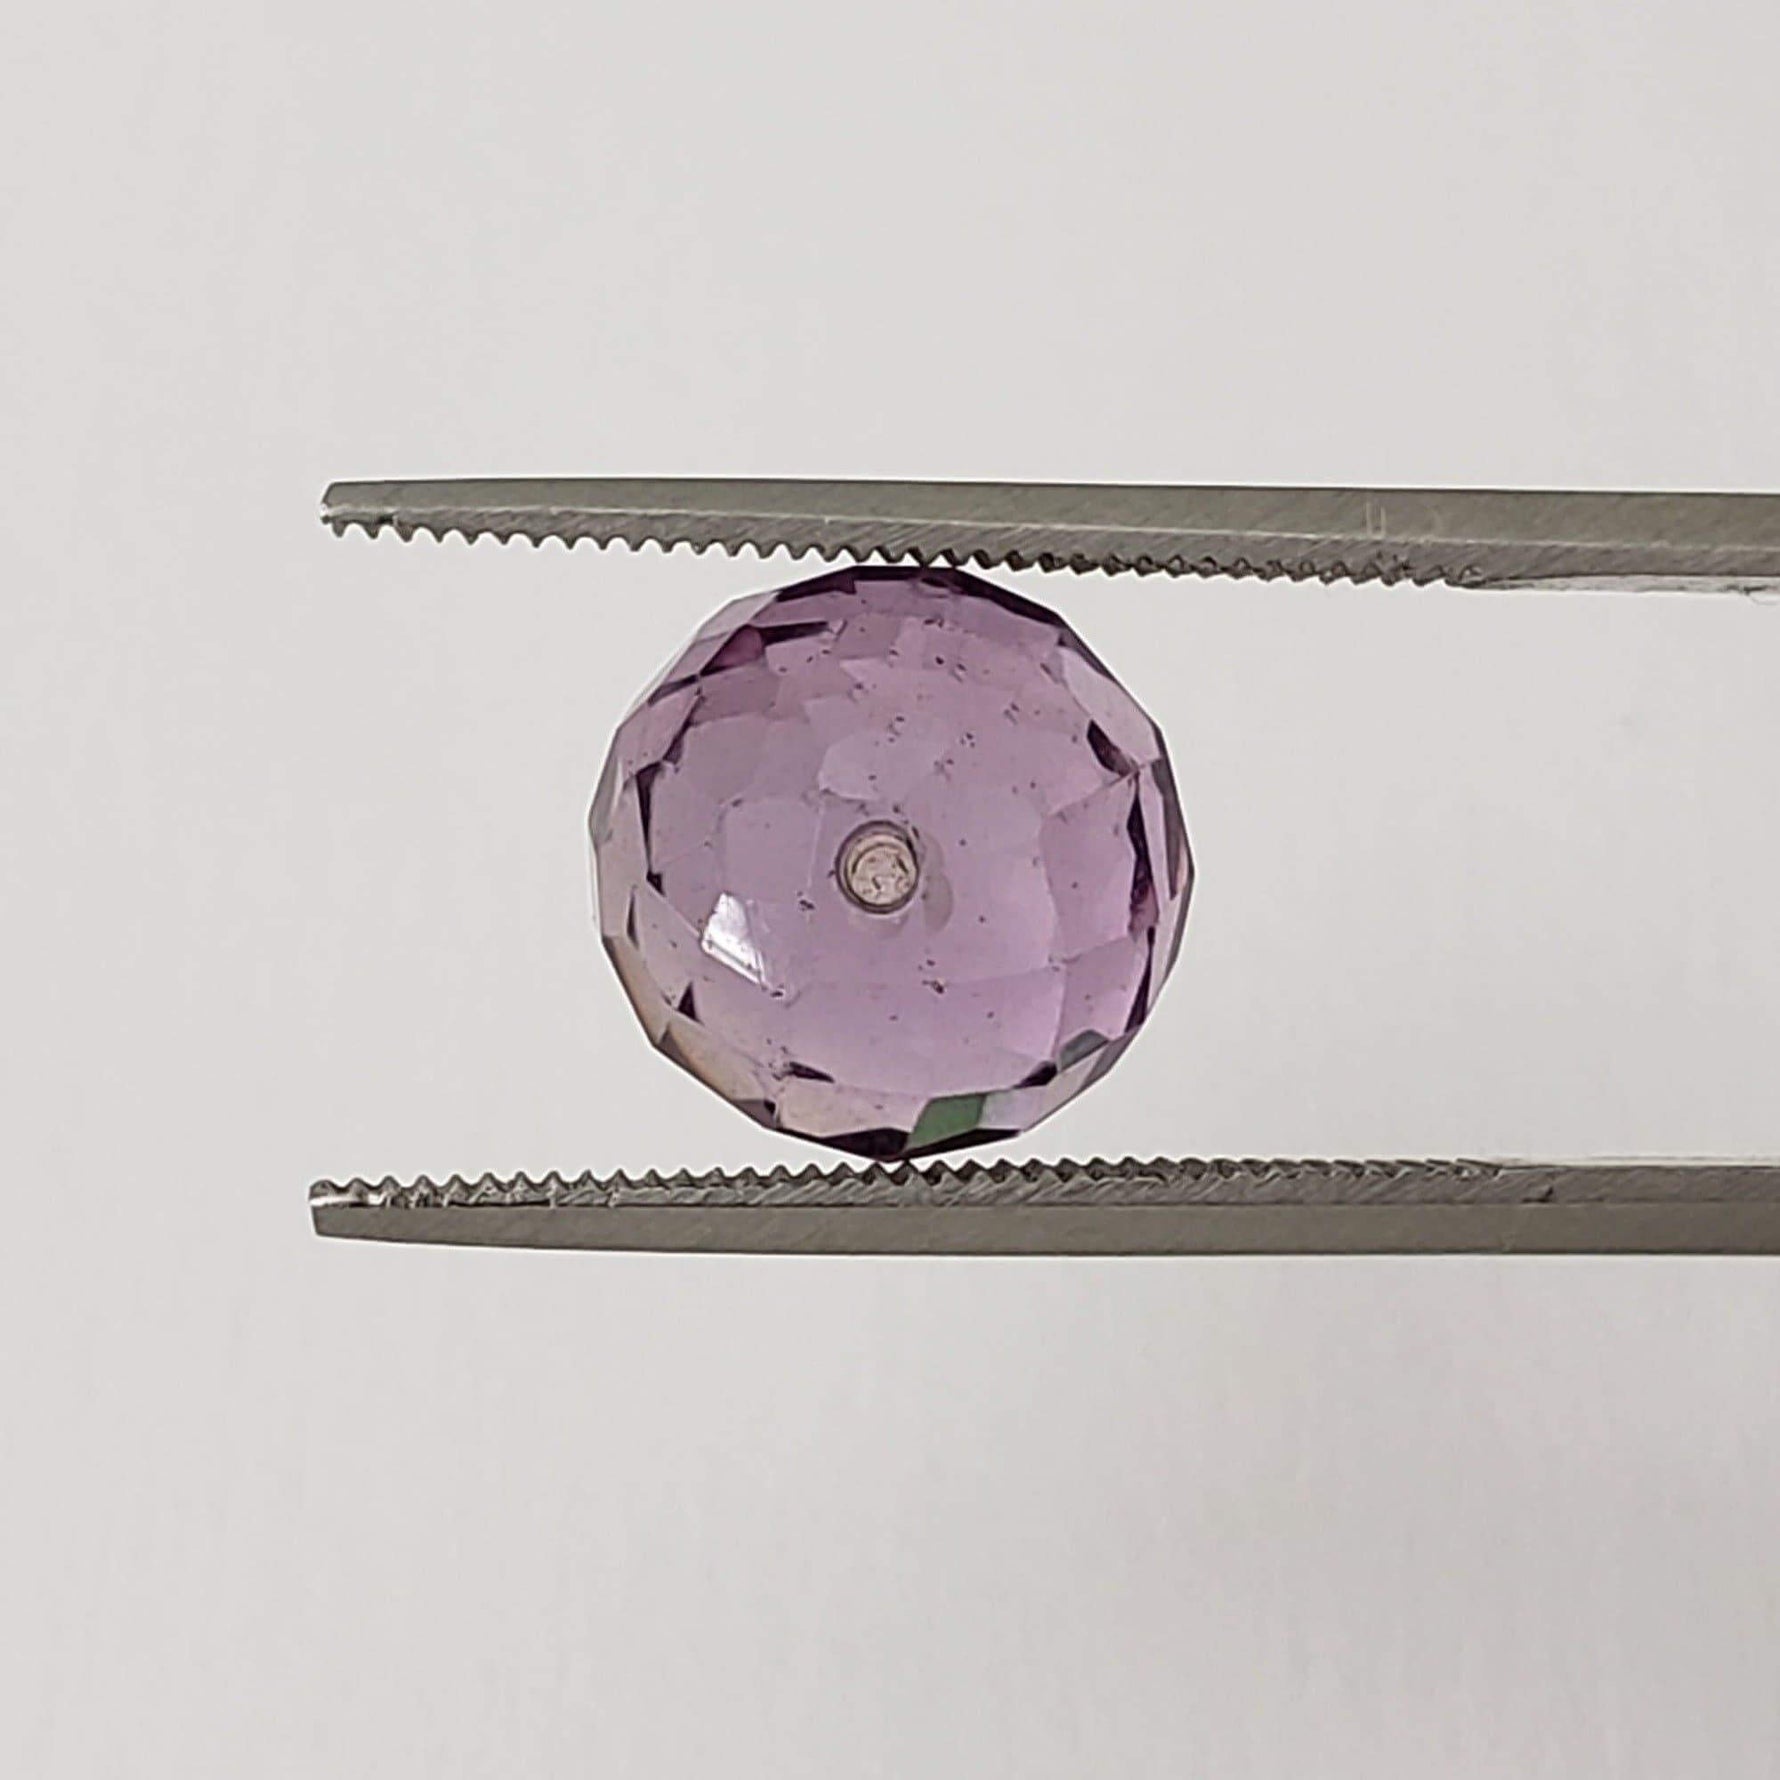 Amethyst | Half Drilled Faceted Sphere | Purple | 10 mm 6.6ct | Canagem.com